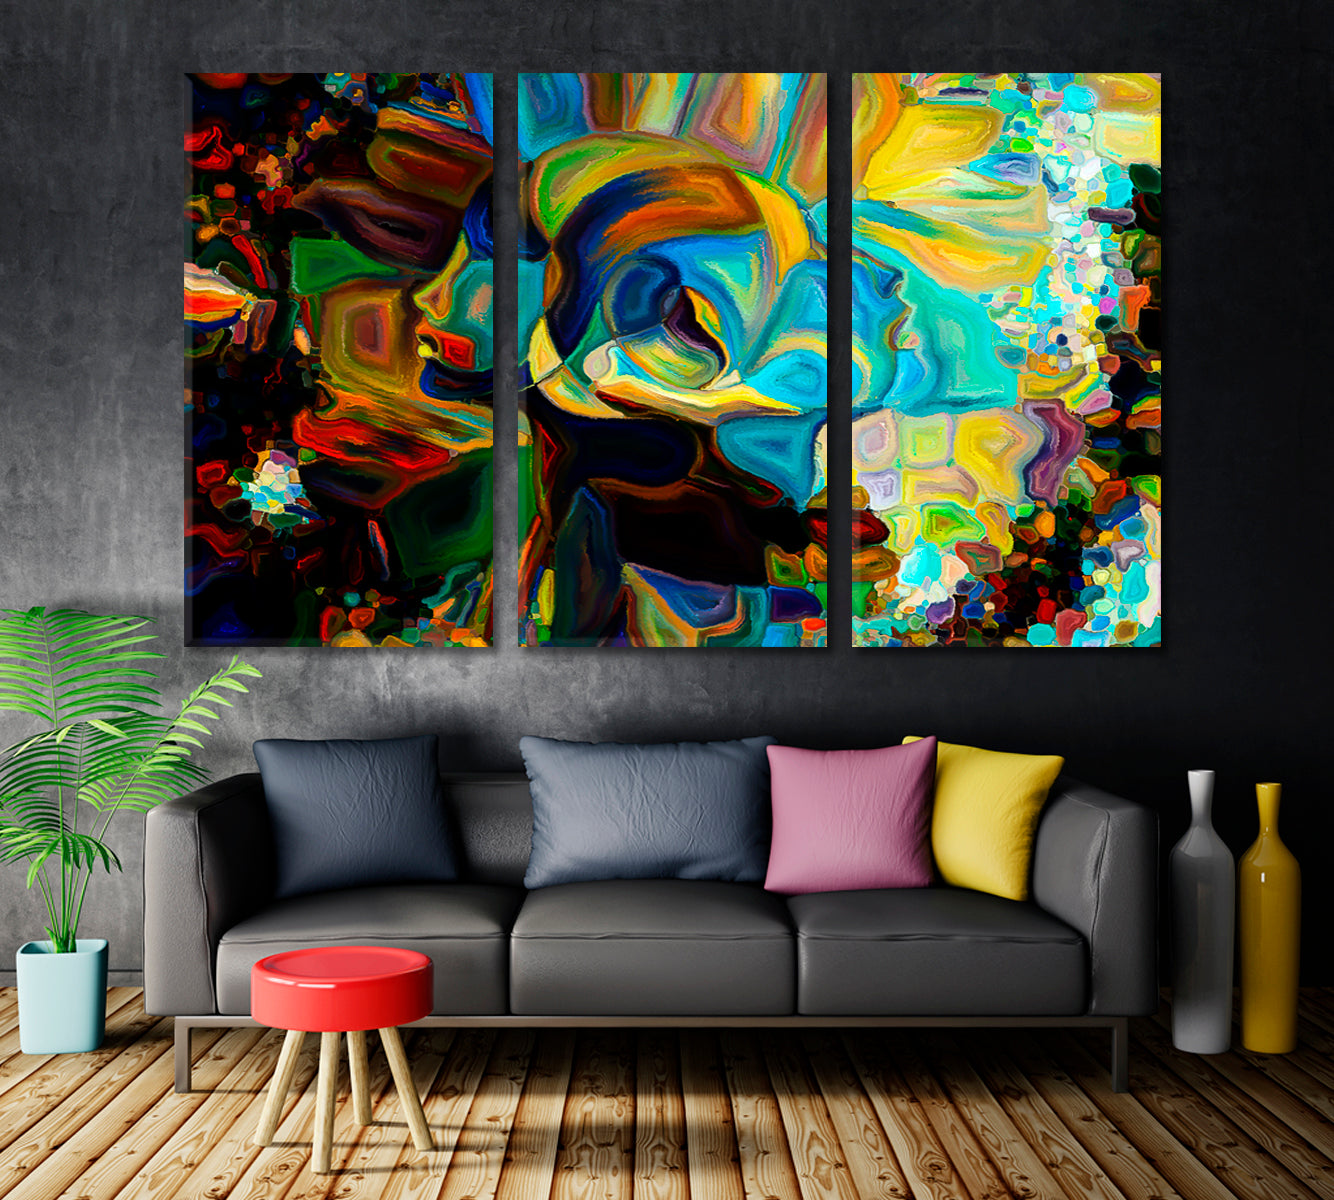 Peaceful Coexistence in Colors and Shapes Abstract Art Print Artesty 3 panels 36" x 24" 